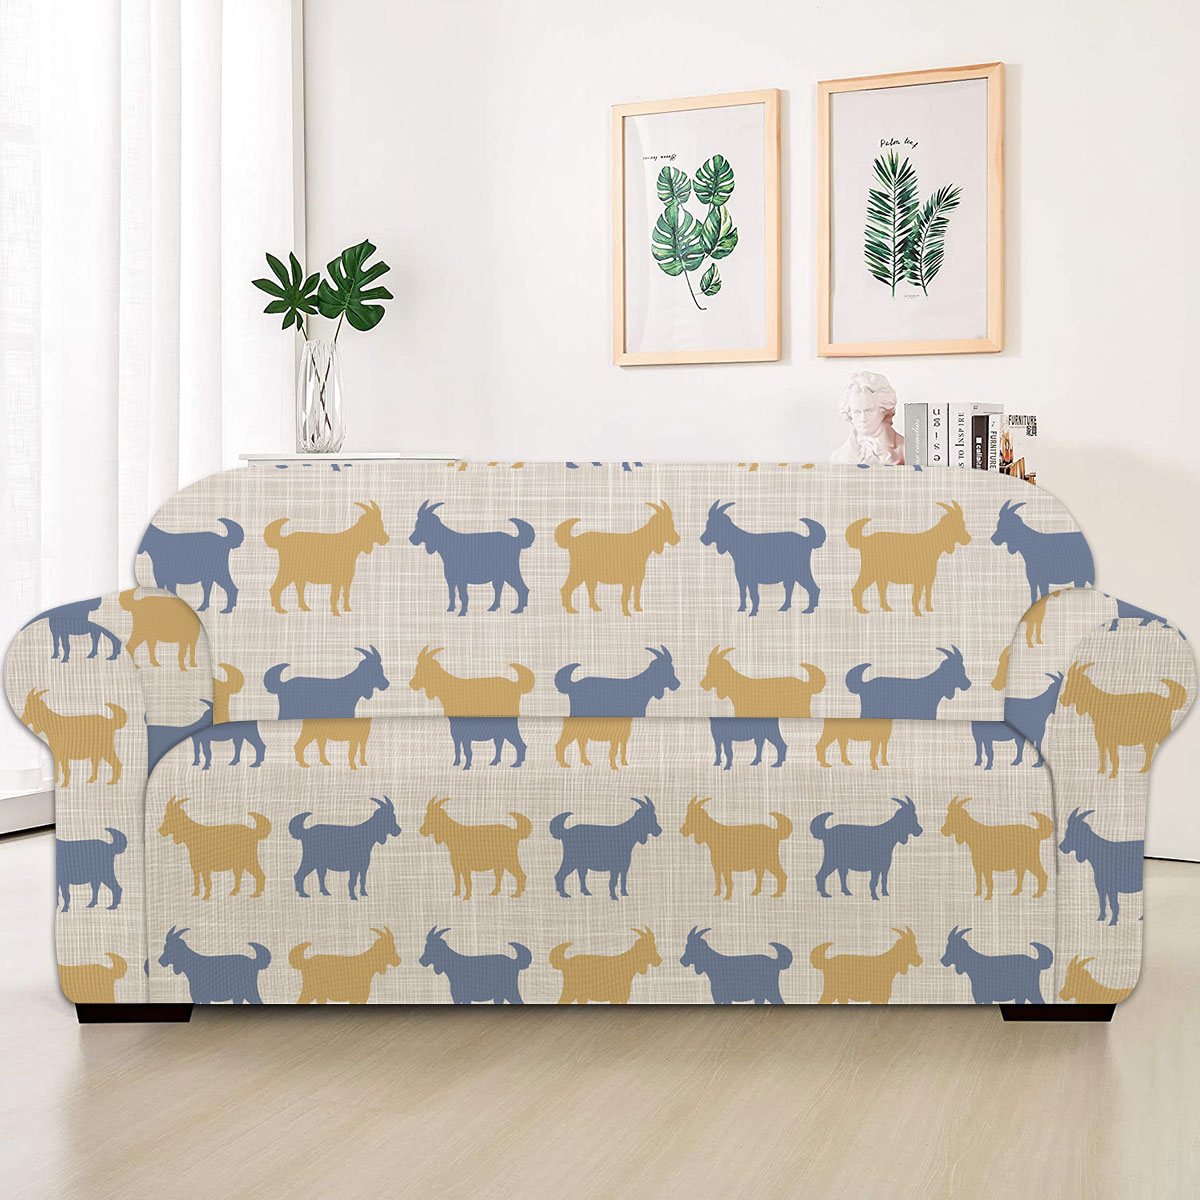 Goat Silhouette Pattern Sofa Cover